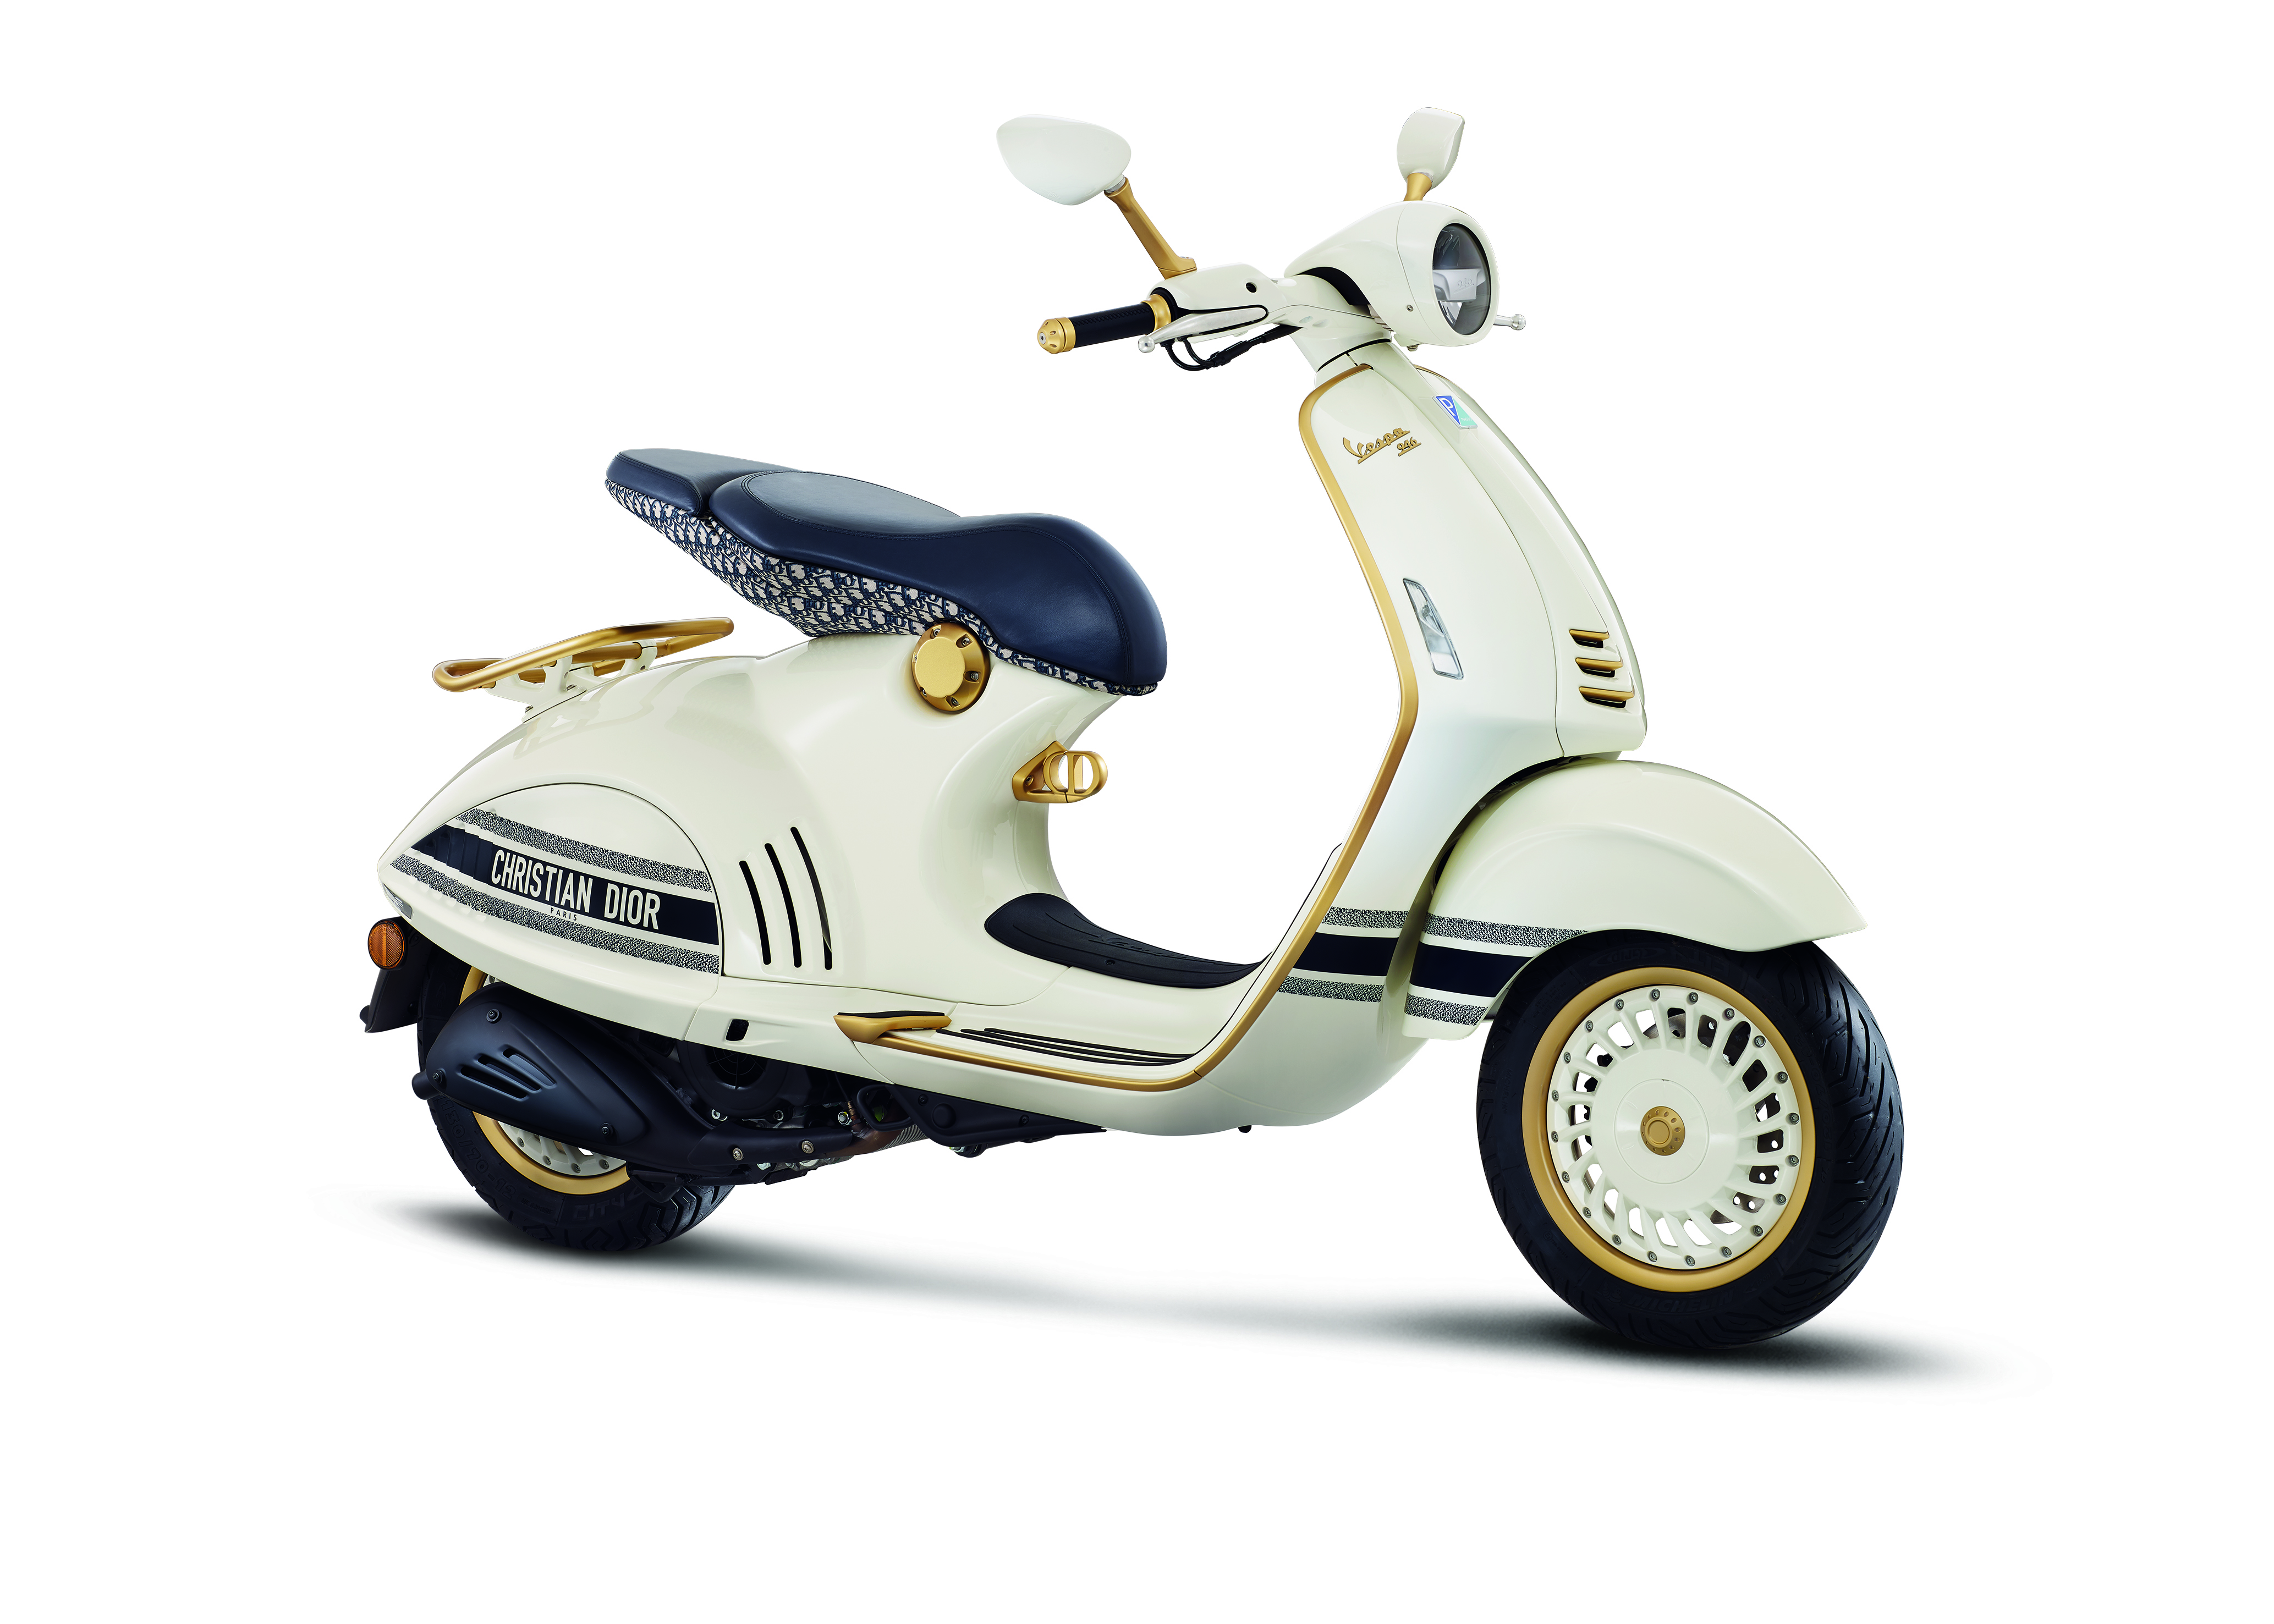 Vespa 946 Christian Dior, Vespa 946 Christian Dior: when Italian and  French style meet 🇫🇷🇮🇹 Launching Spring 2021 😍, By Vespa